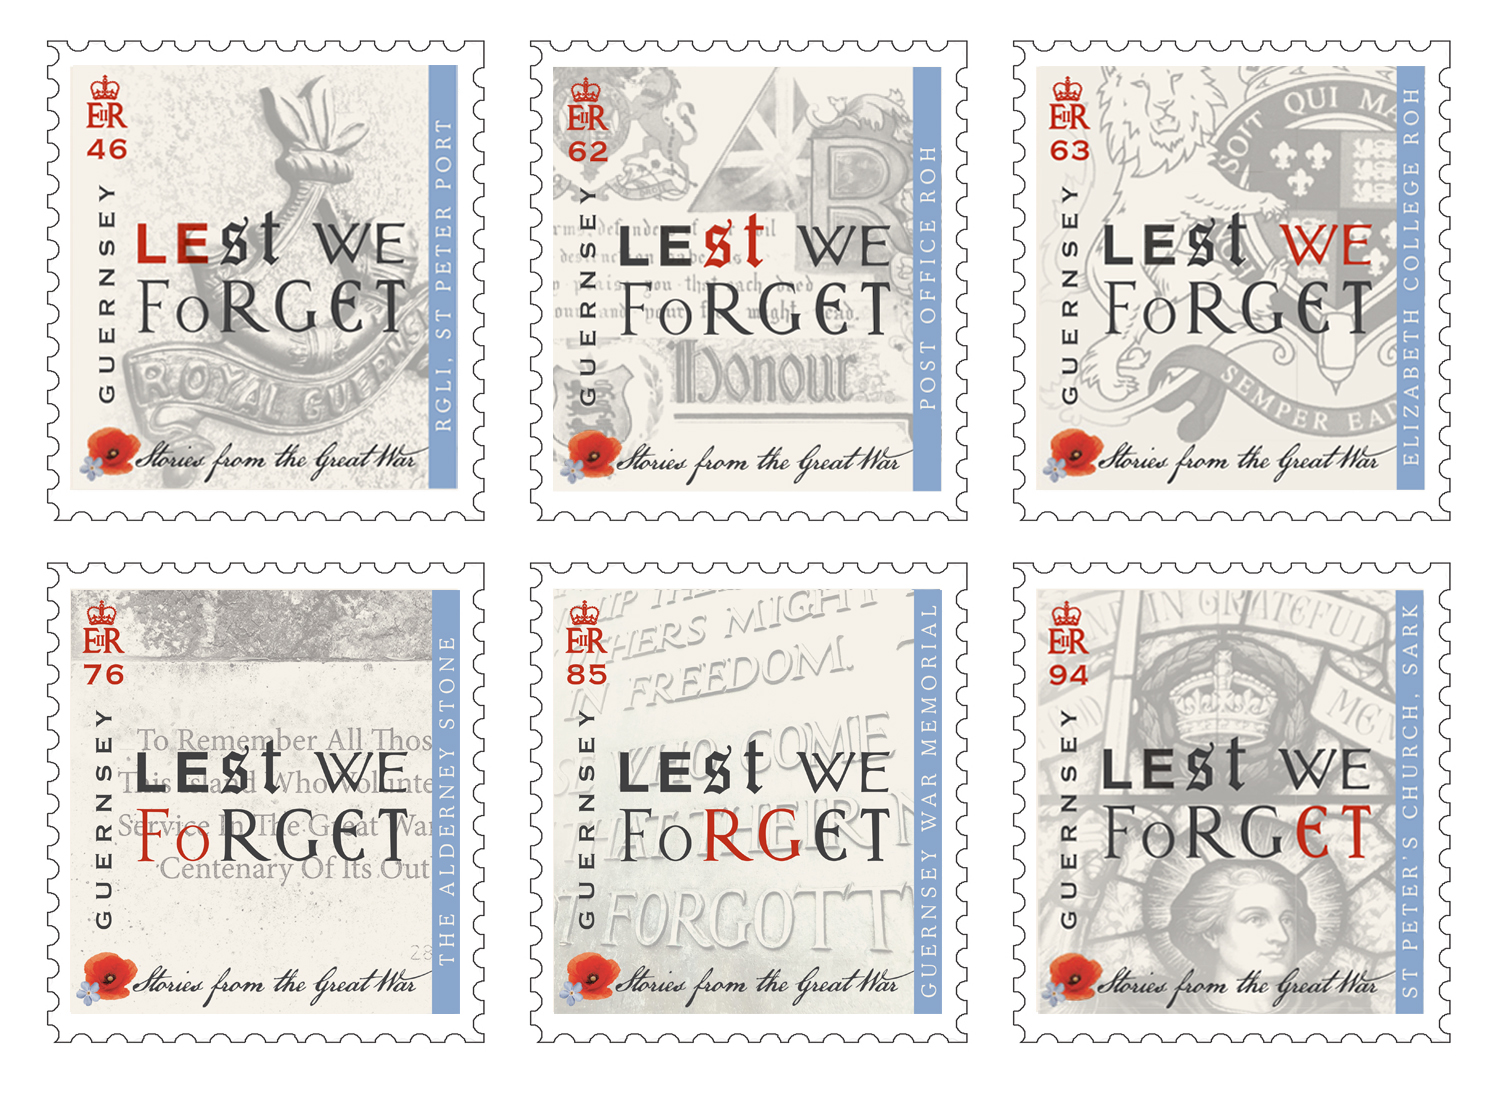 Guernsey Post Commemorates Centenary of The Great War with final stamps